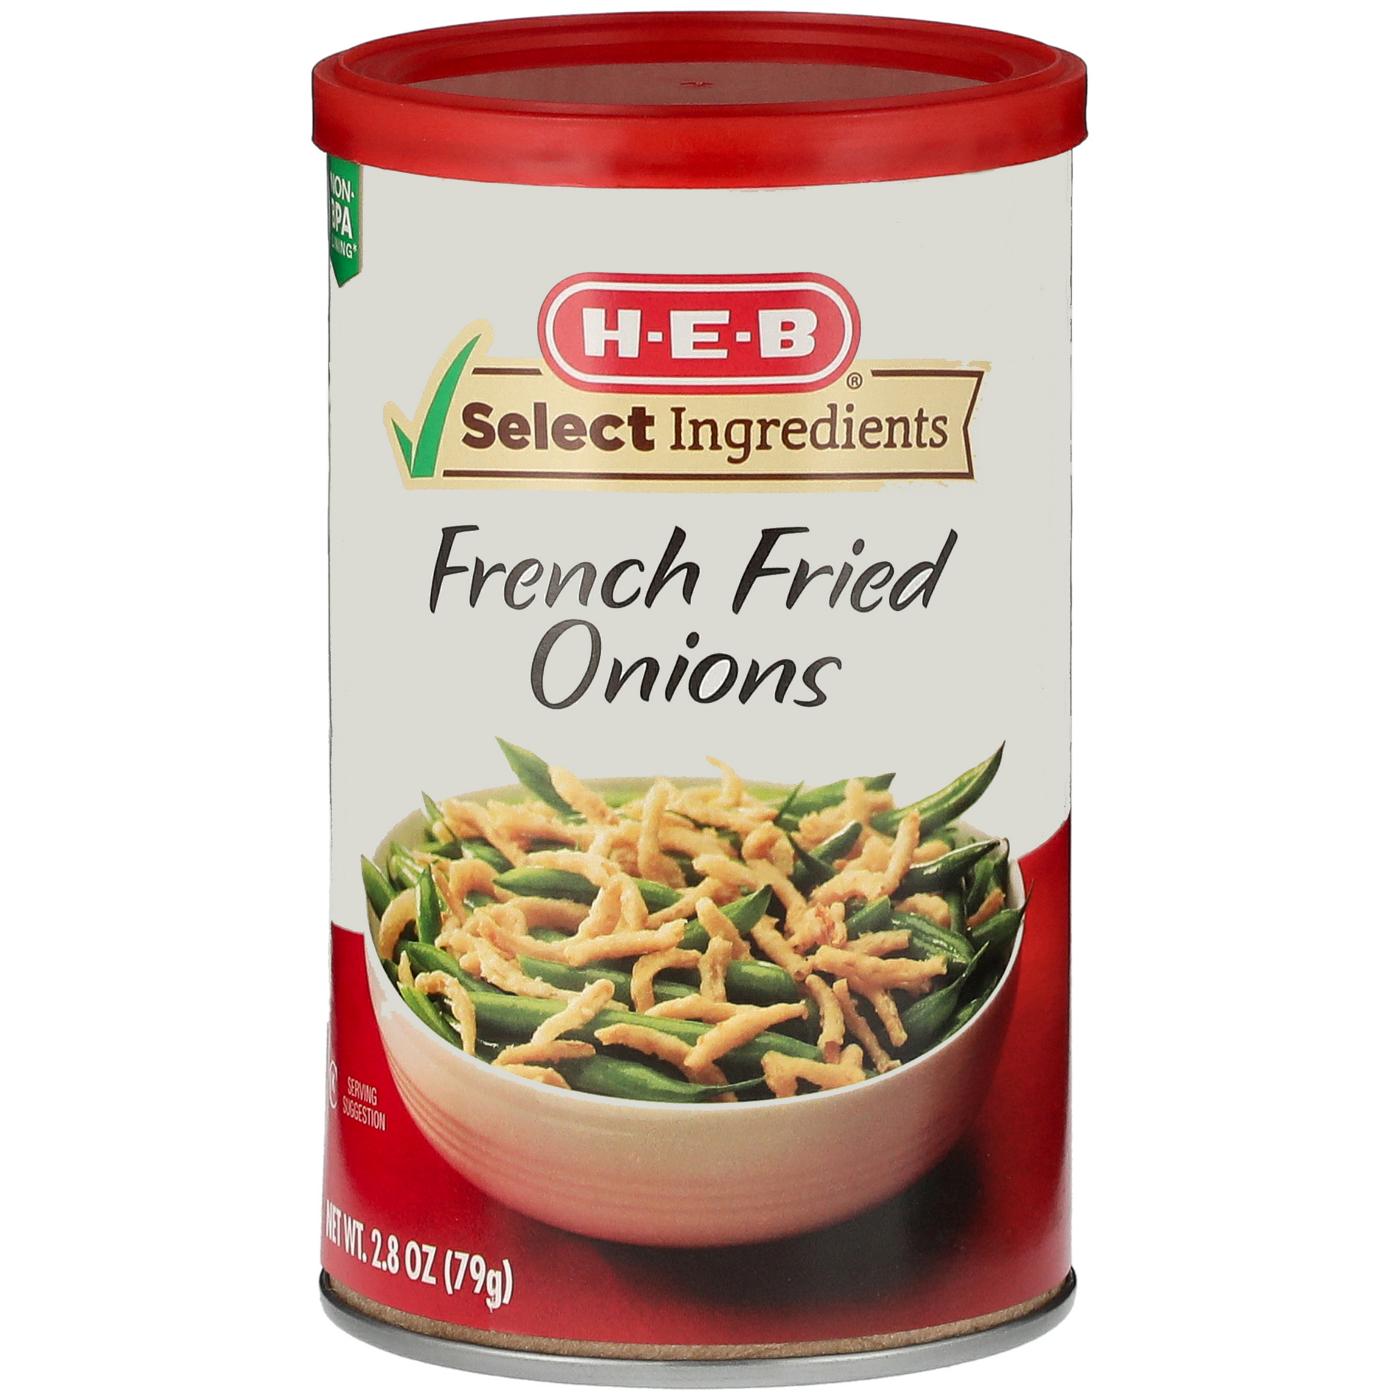 H-E-B French Fried Onions; image 1 of 2